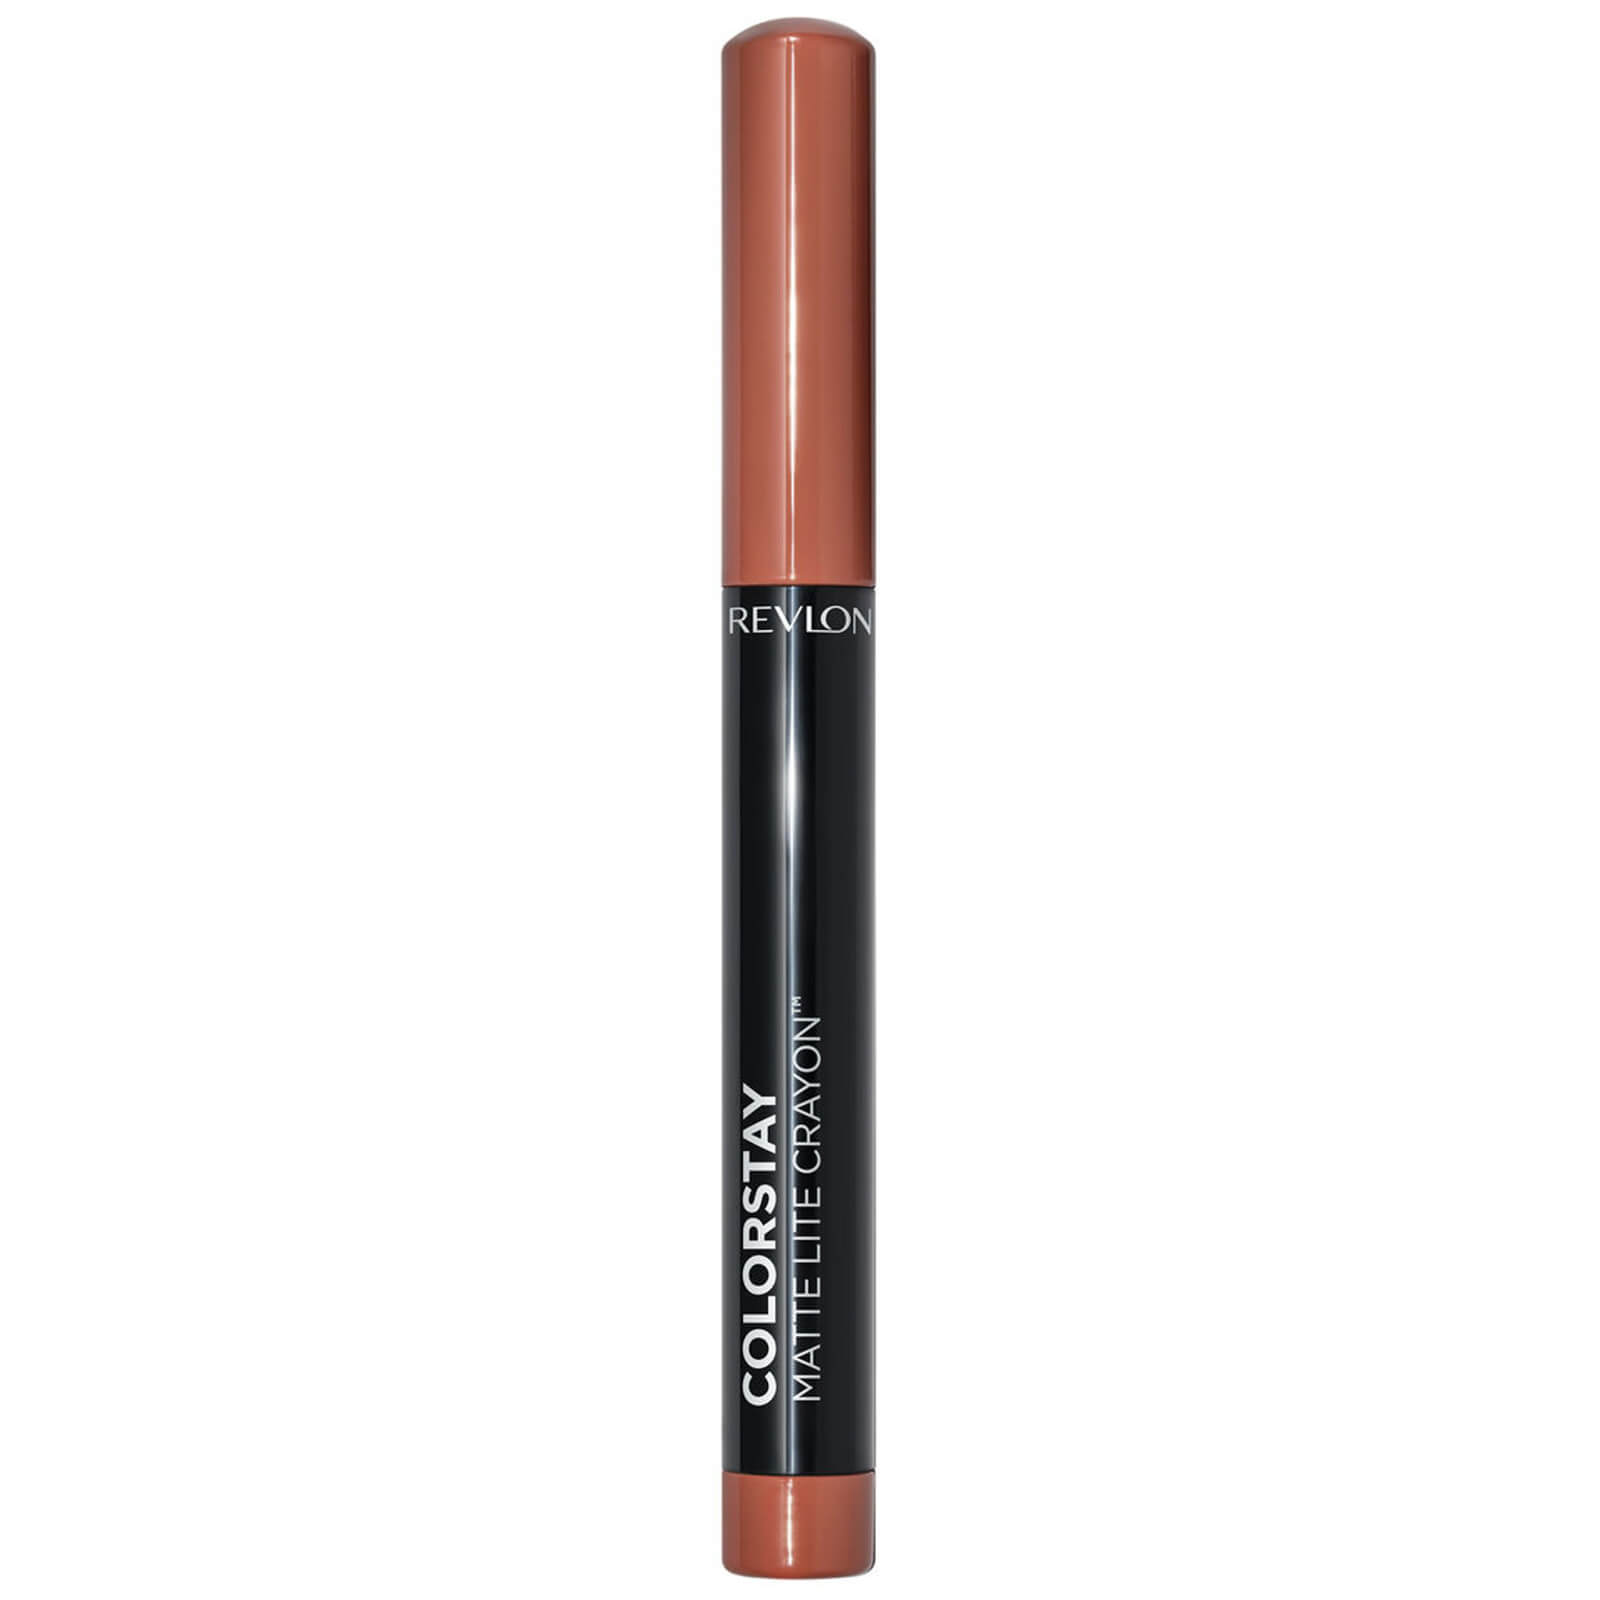 Revlon ColorStay Matte Lite Crayon 1.4g (Various Shades) - Clear the Air